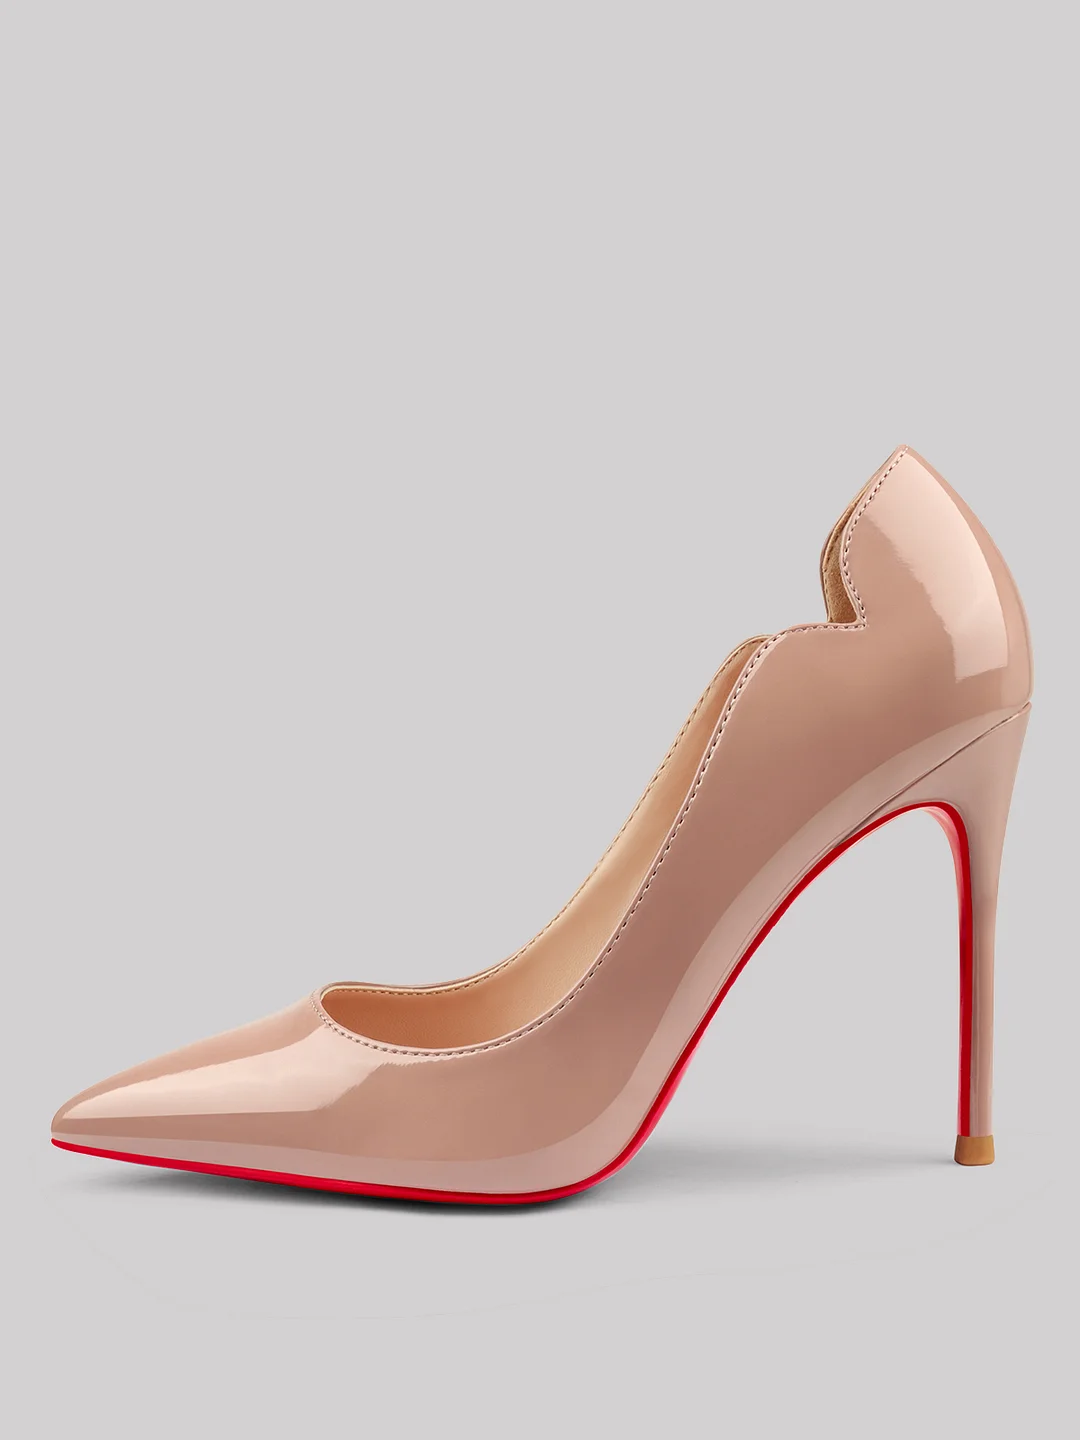 3.94" Women's Classic Pointed Toe V-Shaped Red Bottom High Heels for Party Wedding Patent Pumps